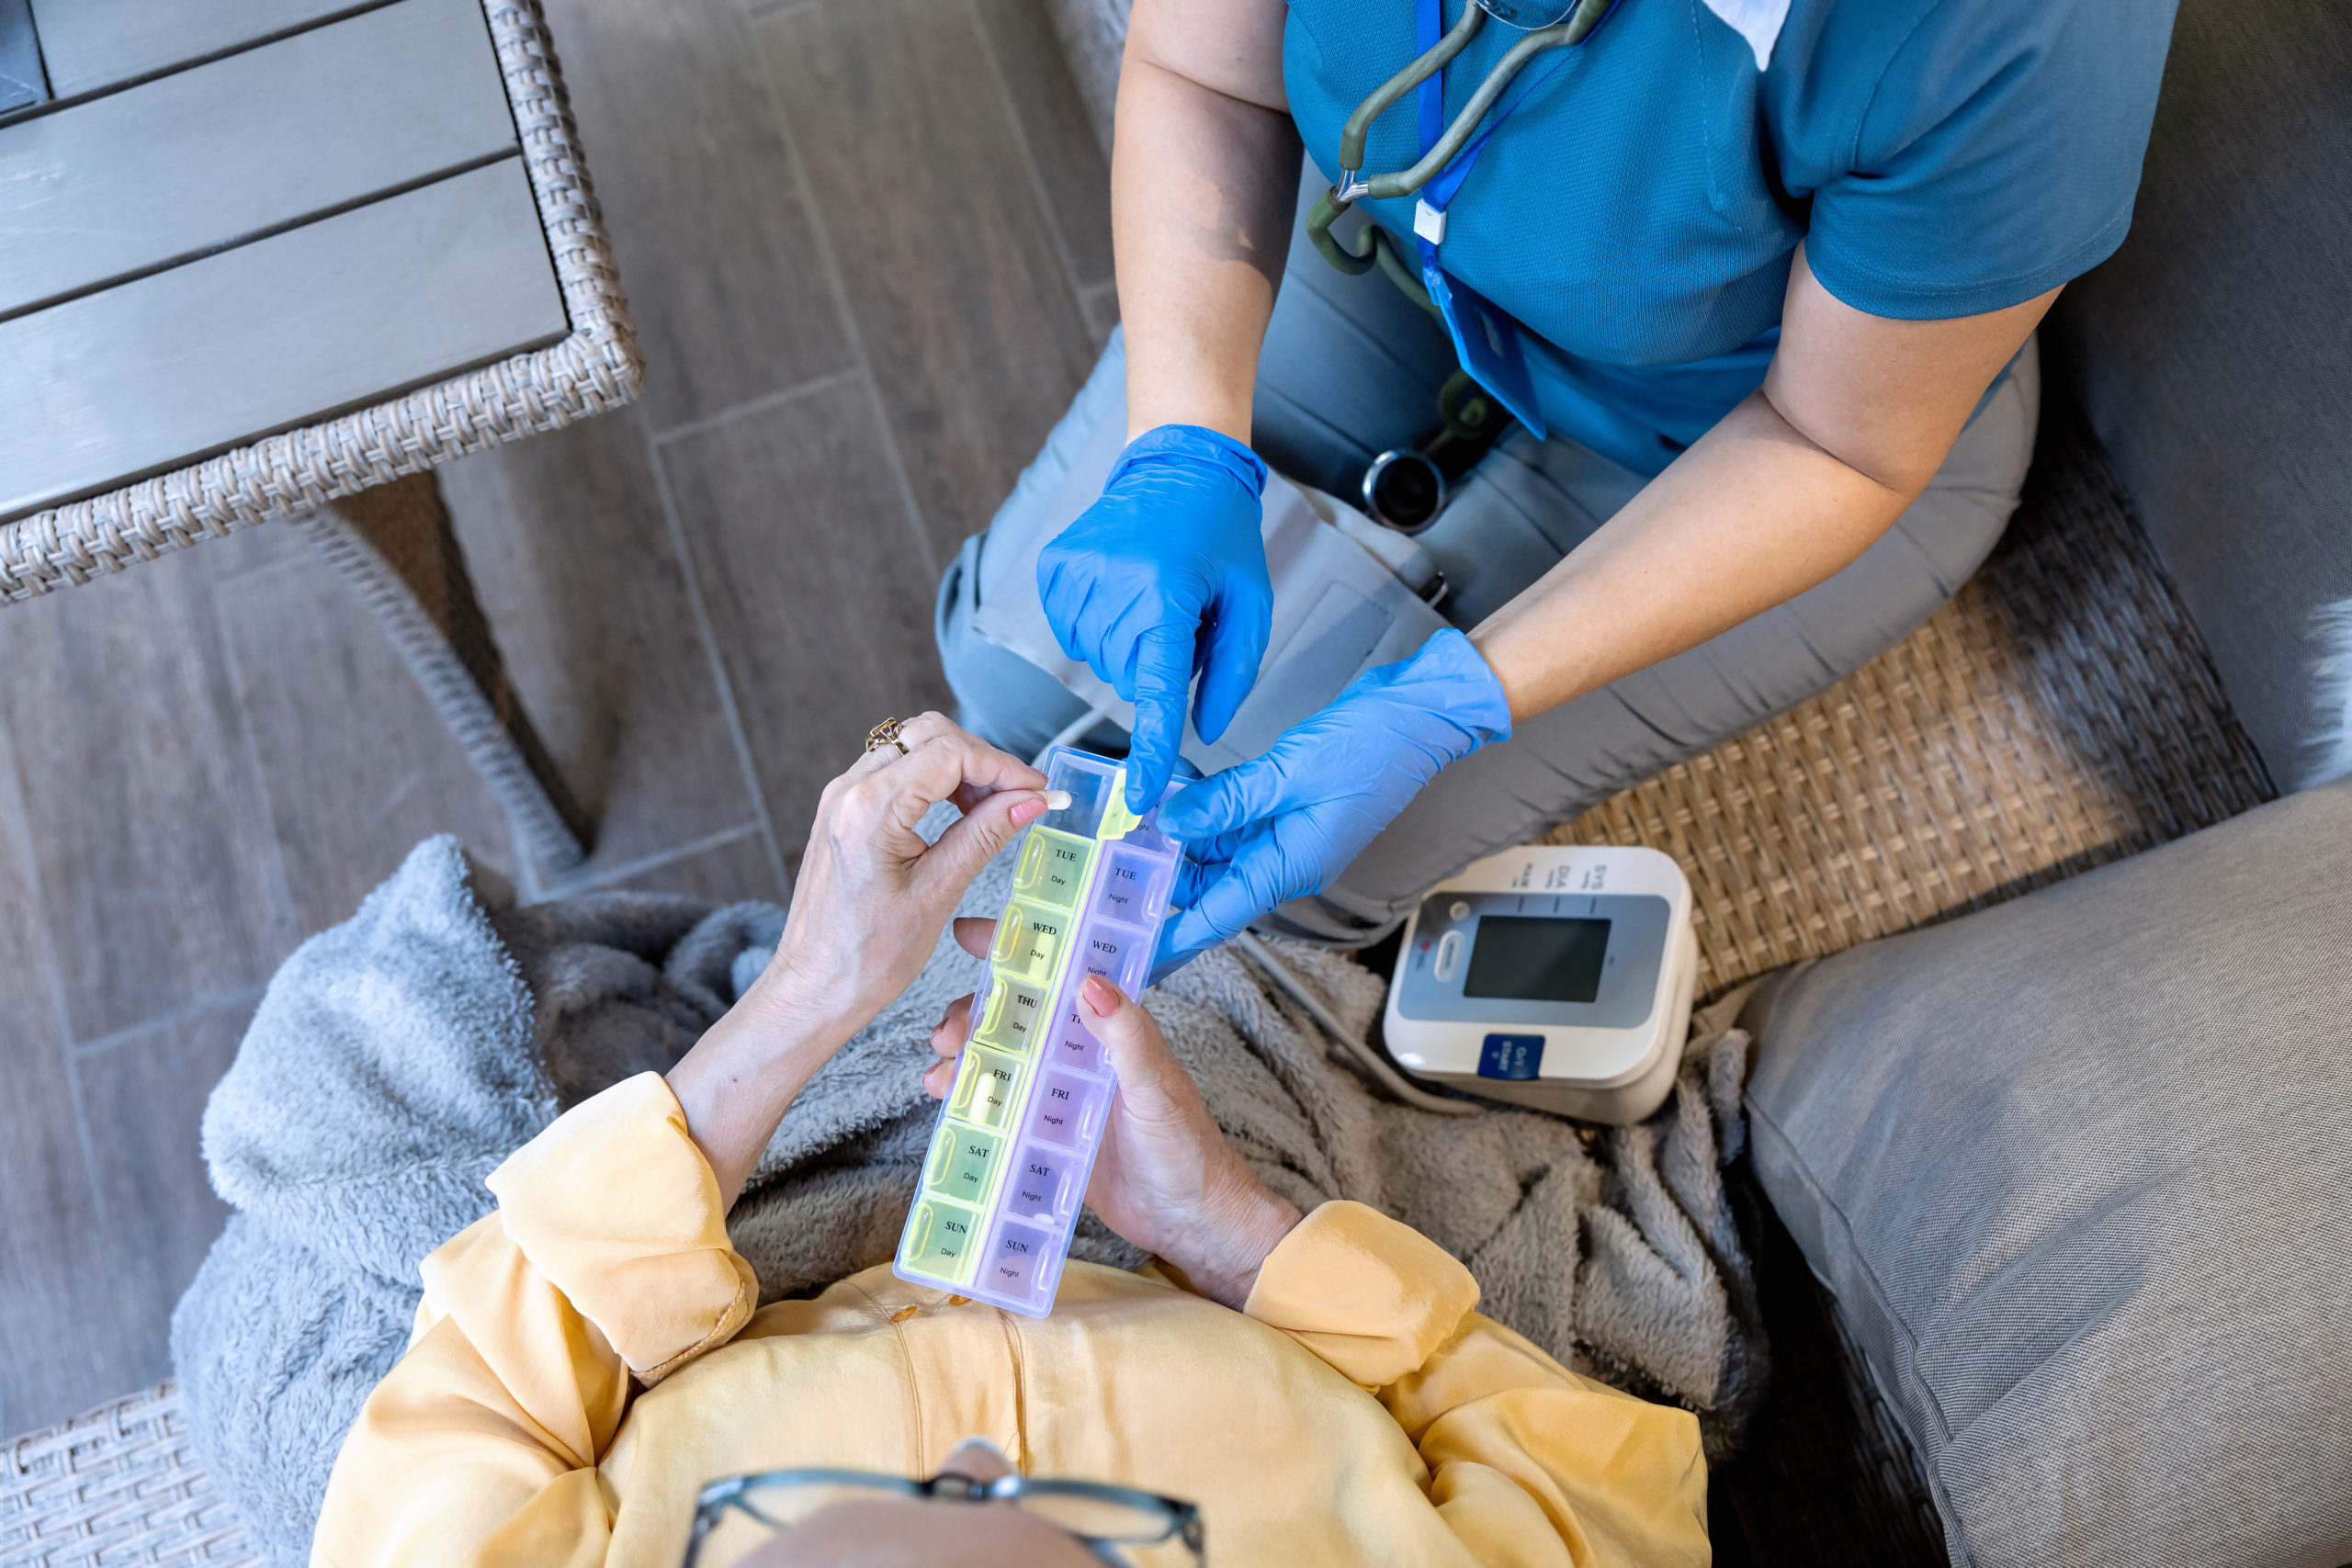 A Senior’s Guide to Diabetes Care in Assisted Living Communities